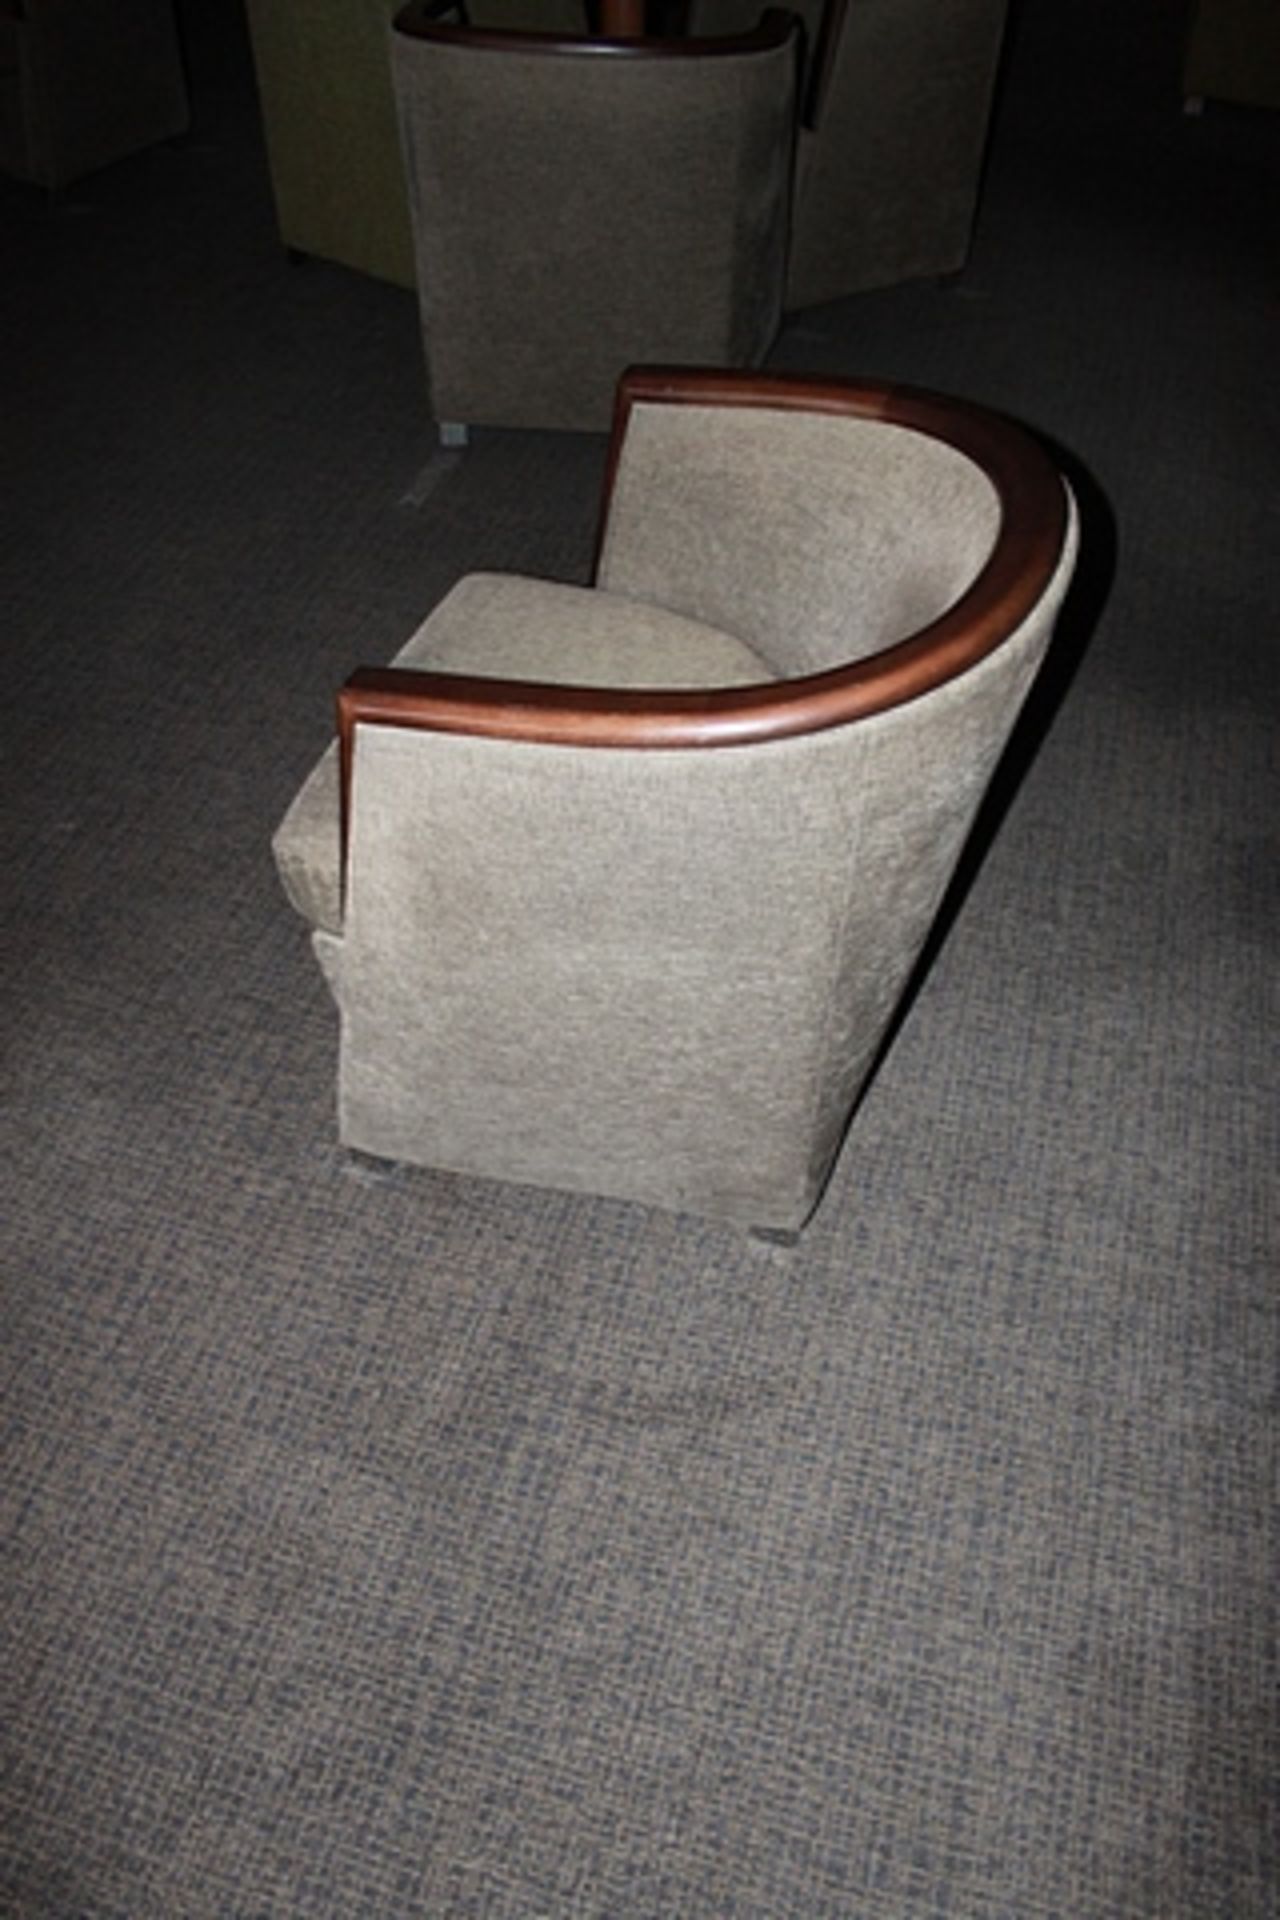 2 x Kesterport AS Tub Chair W/O Wood Armrest Fully Upholstered With Wood Feet CMHR Fire Retardant - Image 2 of 4